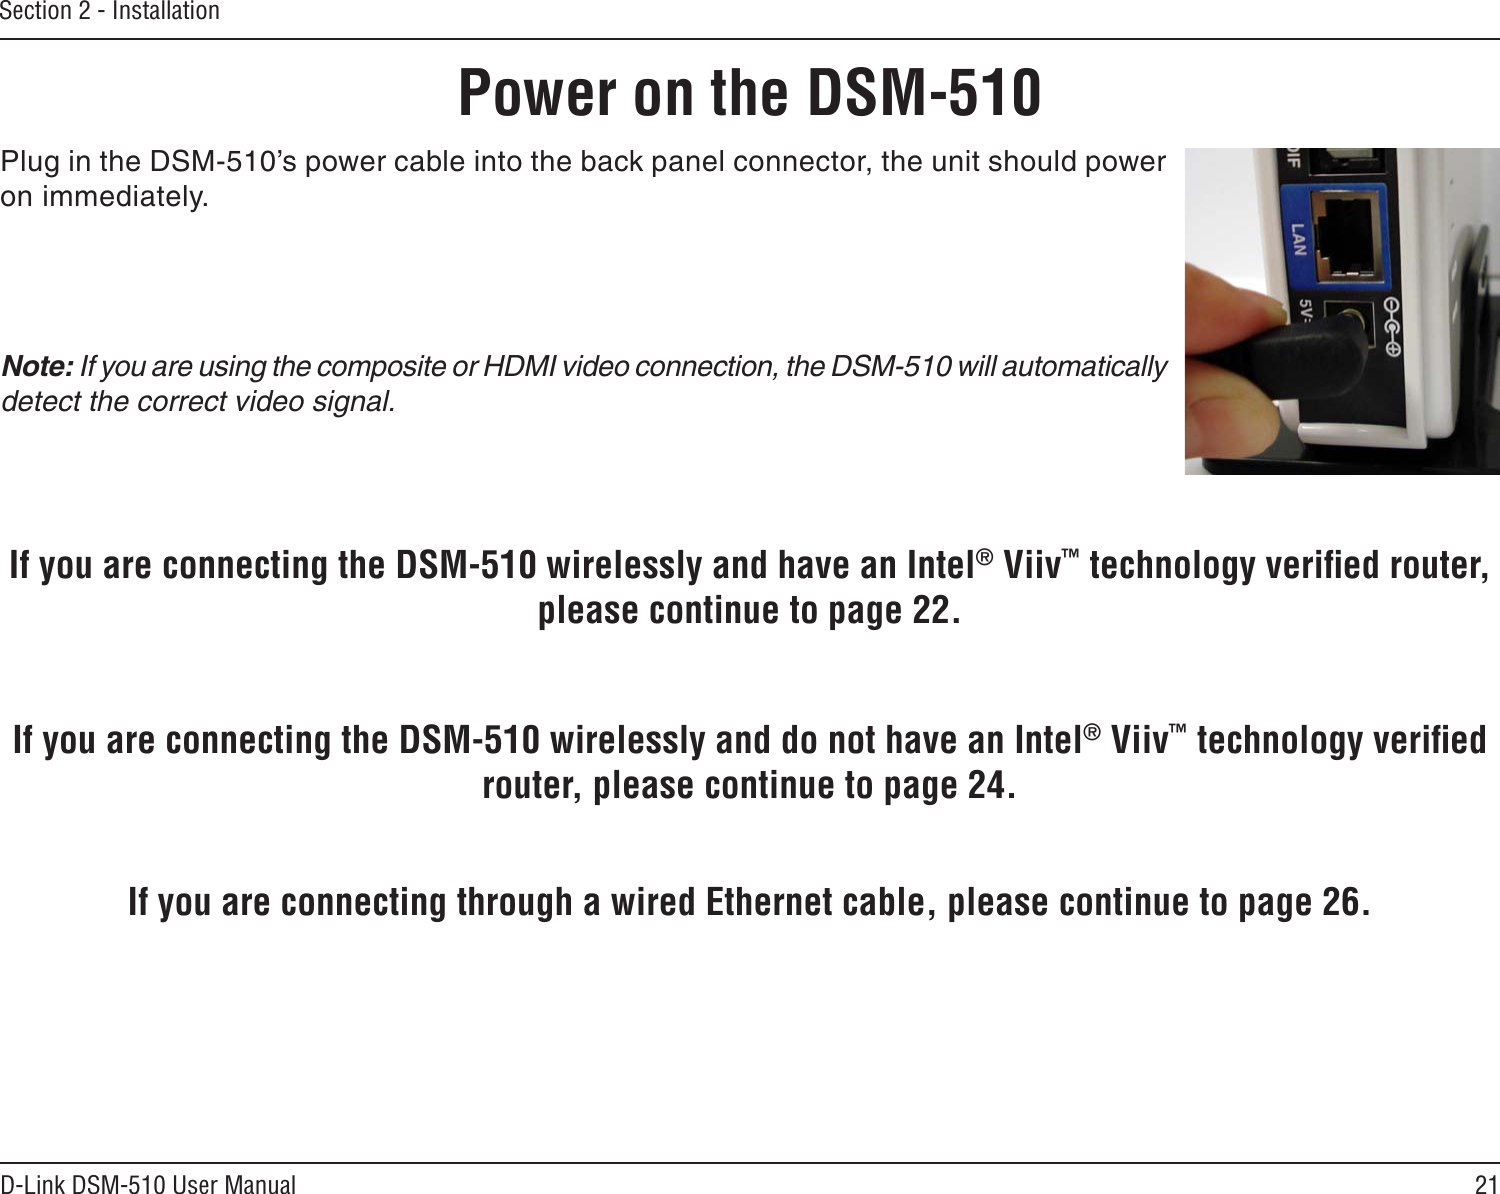 21D-Link DSM-510 User ManualSection 2 - InstallationPower on the DSM-510Plug in the DSM-510’s power cable into the back panel connector, the unit should power on immediately. Note: If you are using the composite or HDMI video connection, the DSM-510 will automatically detect the correct video signal.If you are connecting through a wired Ethernet cable, please continue to page 26.If you are connecting the DSM-510 wirelessly and do not have an Intel® Viiv™ technology veriﬁed router, please continue to page 24.If you are connecting the DSM-510 wirelessly and have an Intel® Viiv™ technology veriﬁed router, please continue to page 22.